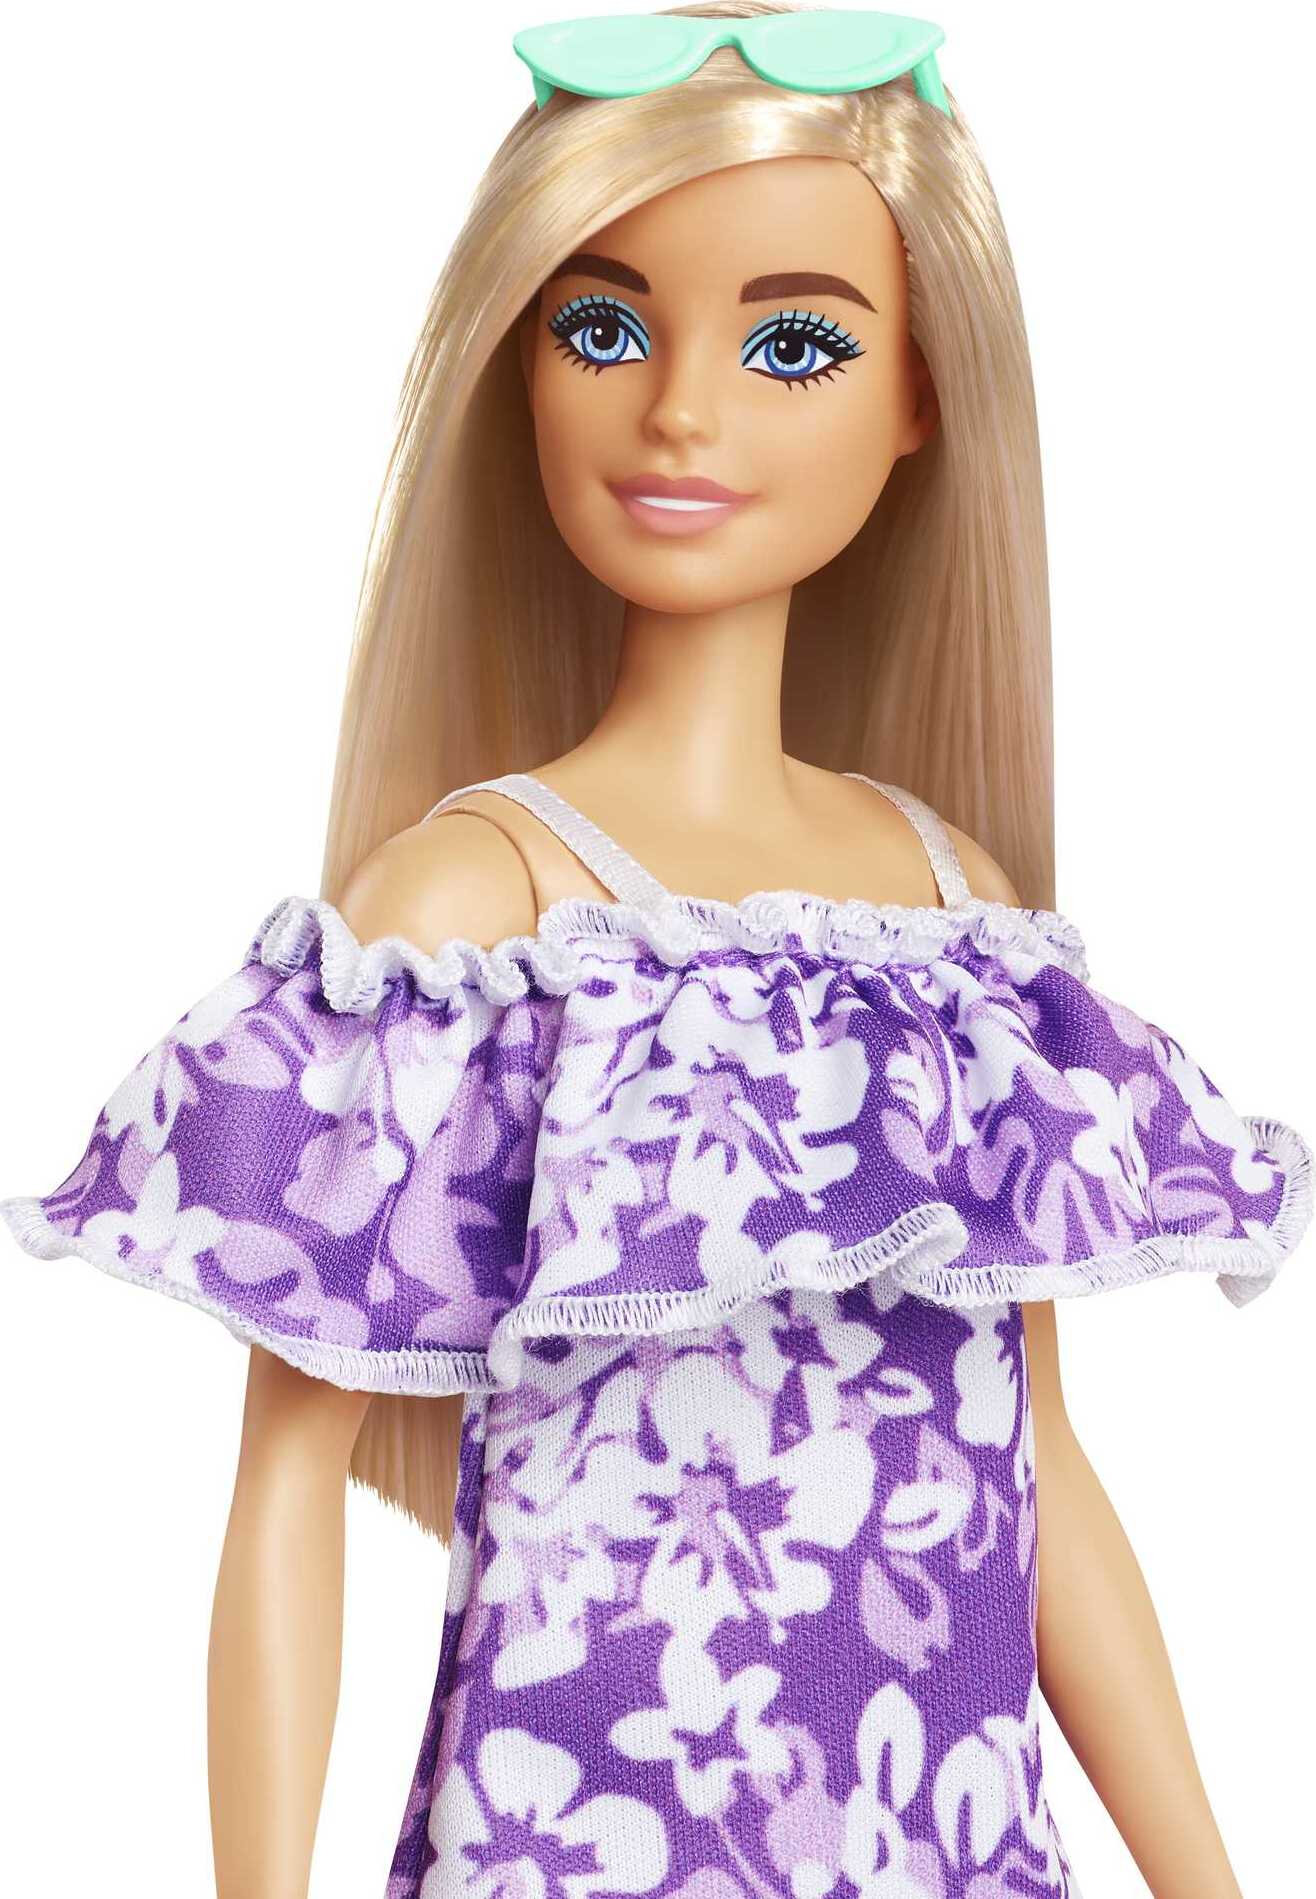 Barbie Loves the Ocean Beach Doll with Blonde Hair in Sundress, Made from Recycled Plastics - image 5 of 6